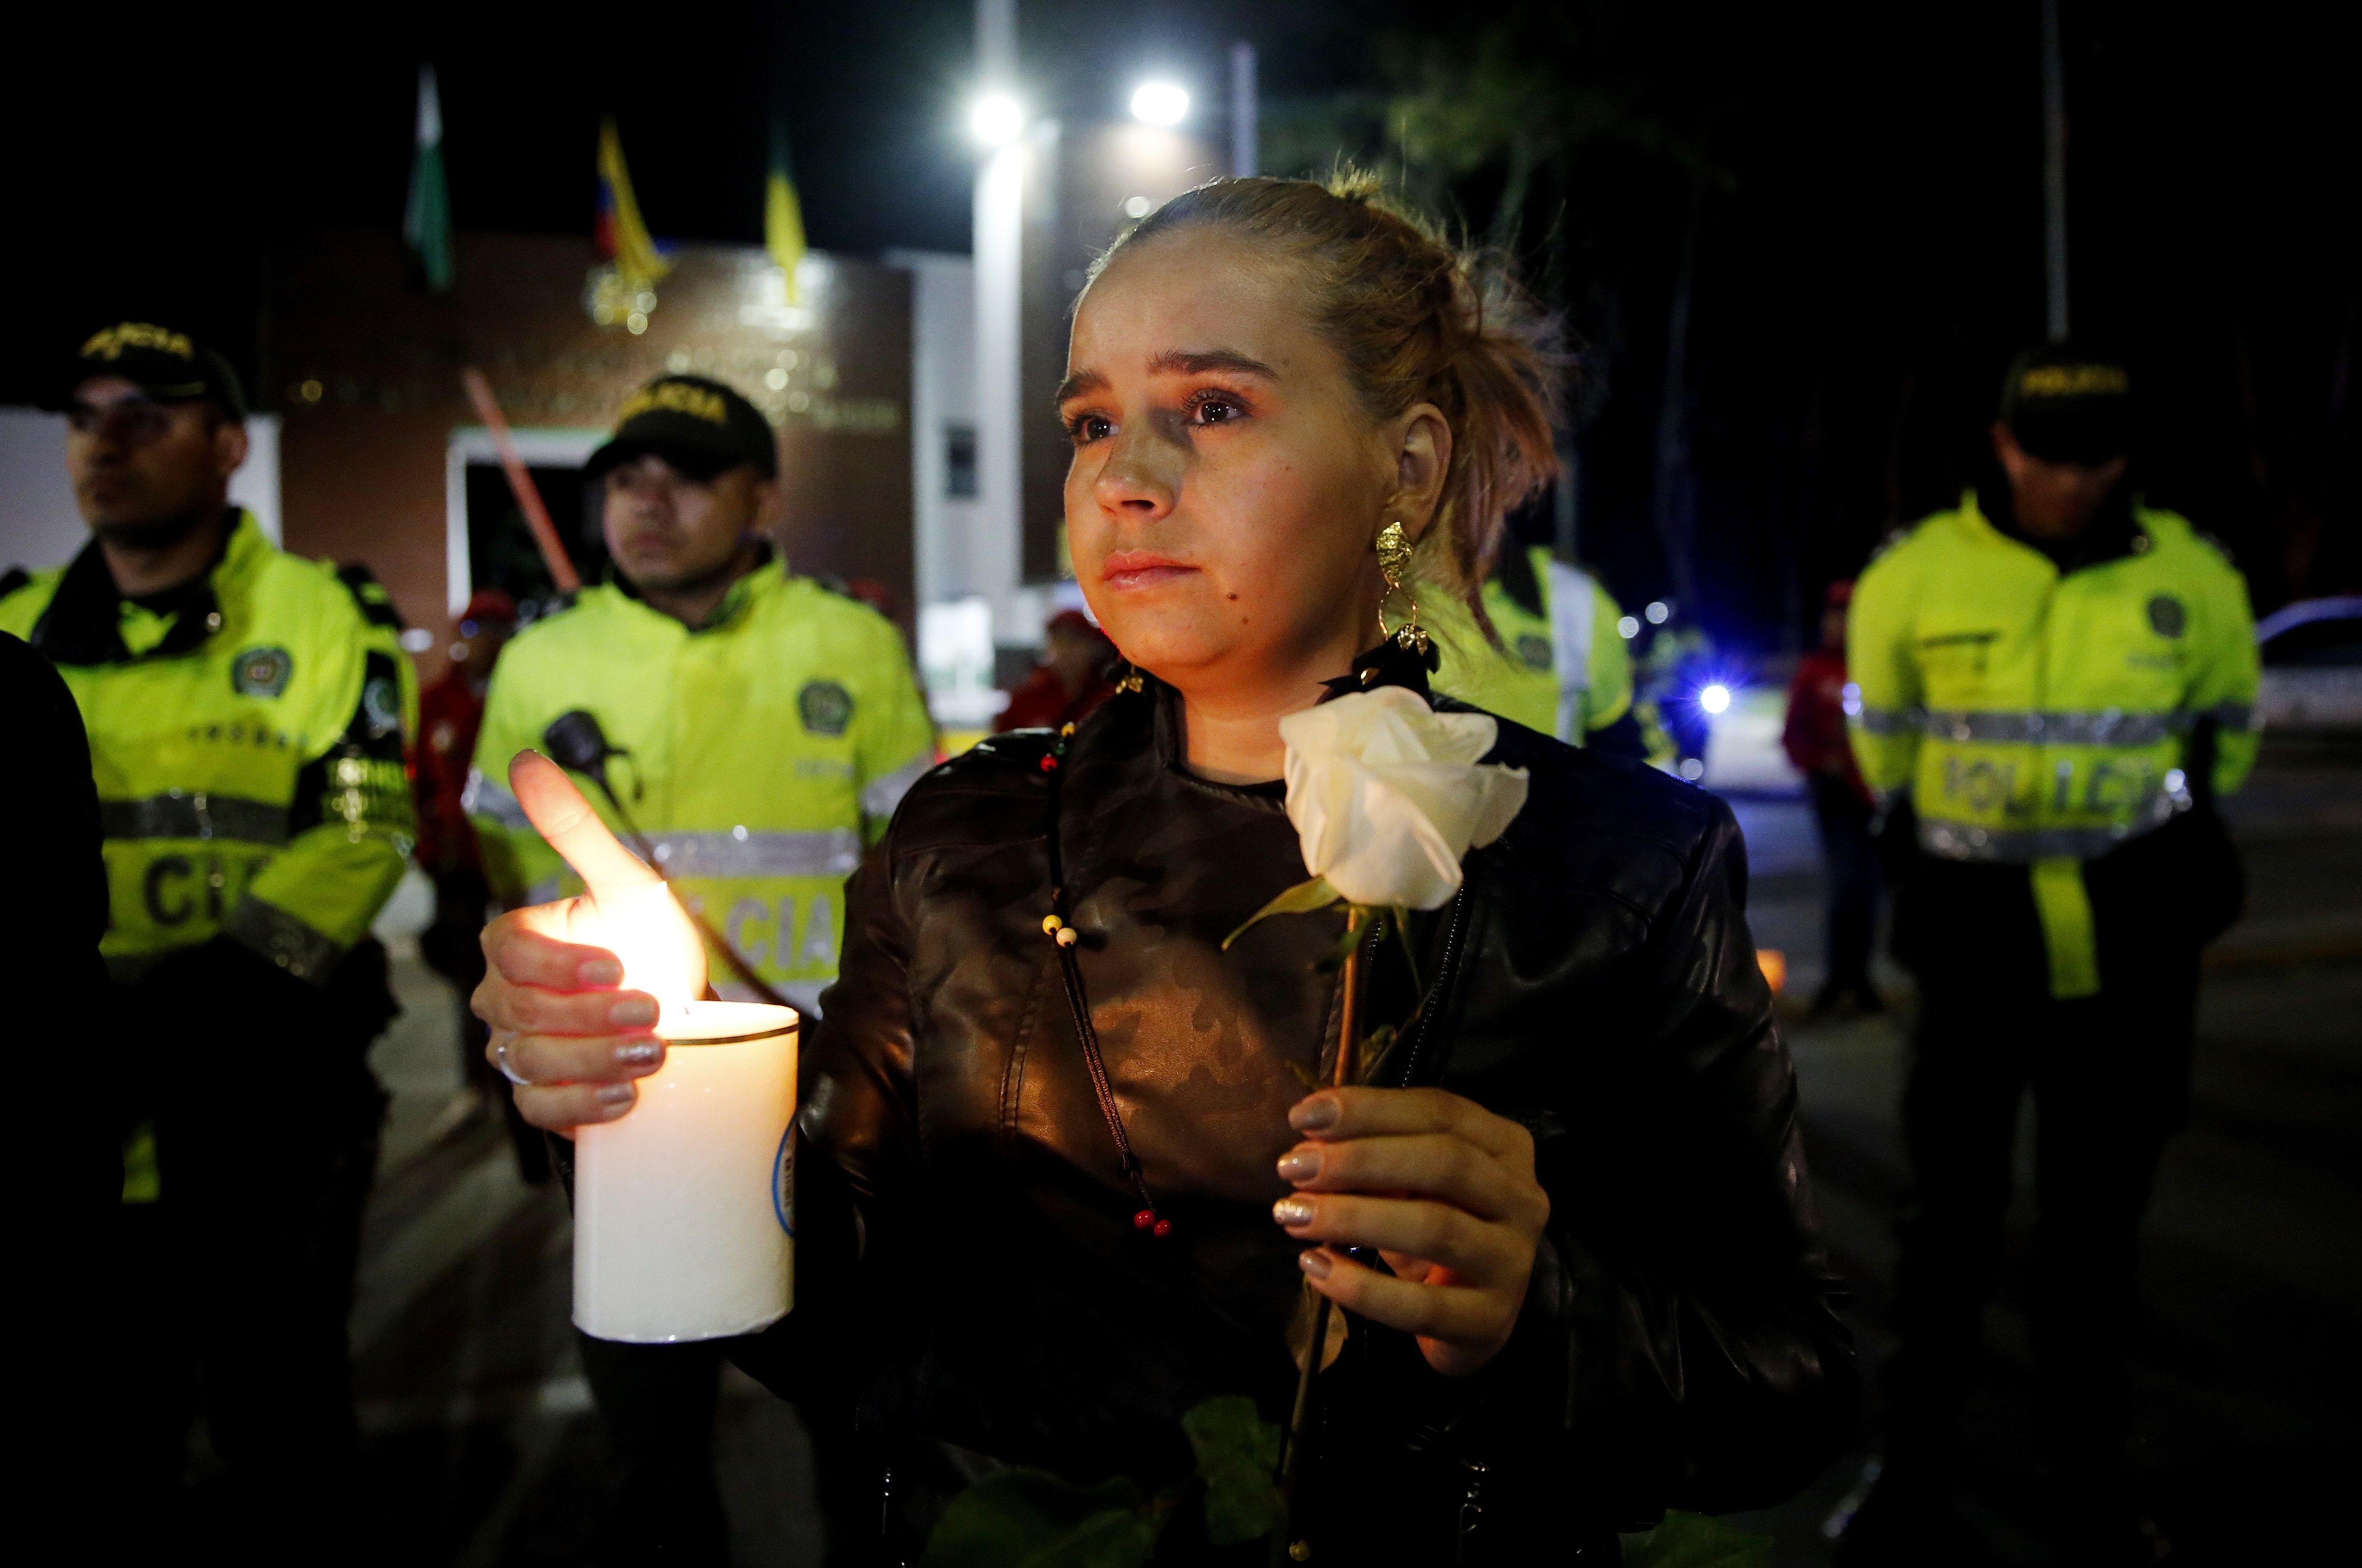 Citizens and police participate in a sit-in in front of the Francisco de Paula Santander police cadet academy in Bogota, Colombia, on Jan. 17, 2019, to honor the memory of those 20 cadets who died on Jan. 17, 2019, in a car-bomb attack. EPA-EFE/Leonardo Munoz